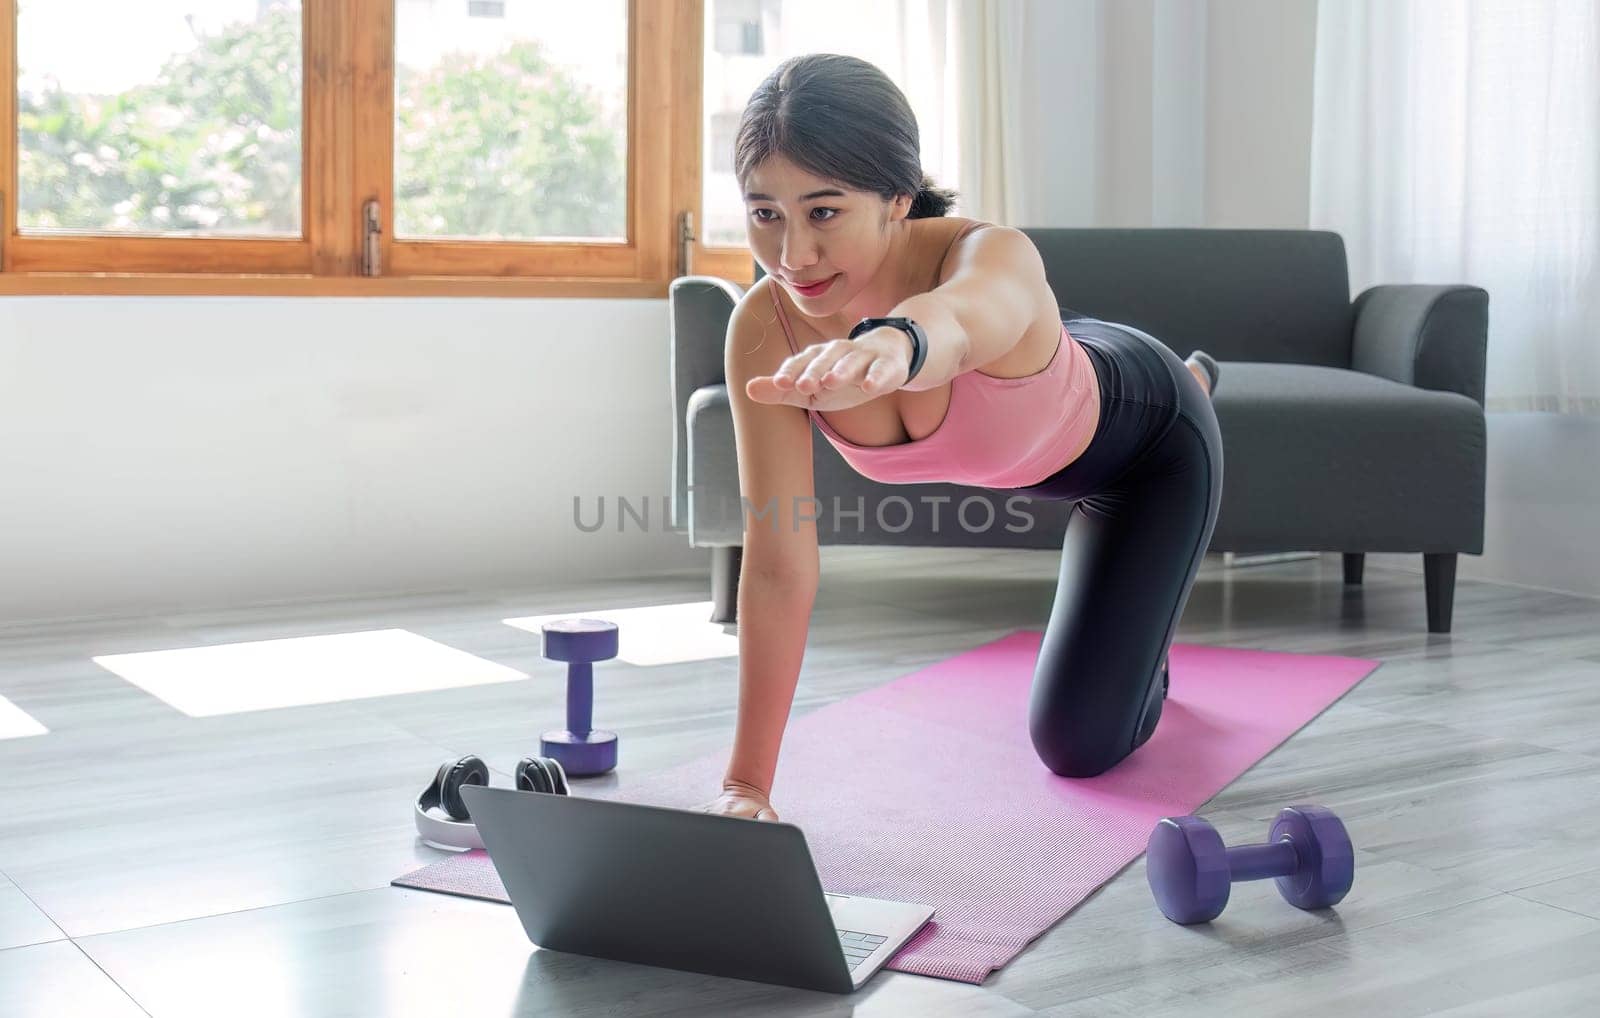 Young woman exercising in front of laptop Wear a sports bar outfit. Do yoga and lift dumbbells on the exercise mat..